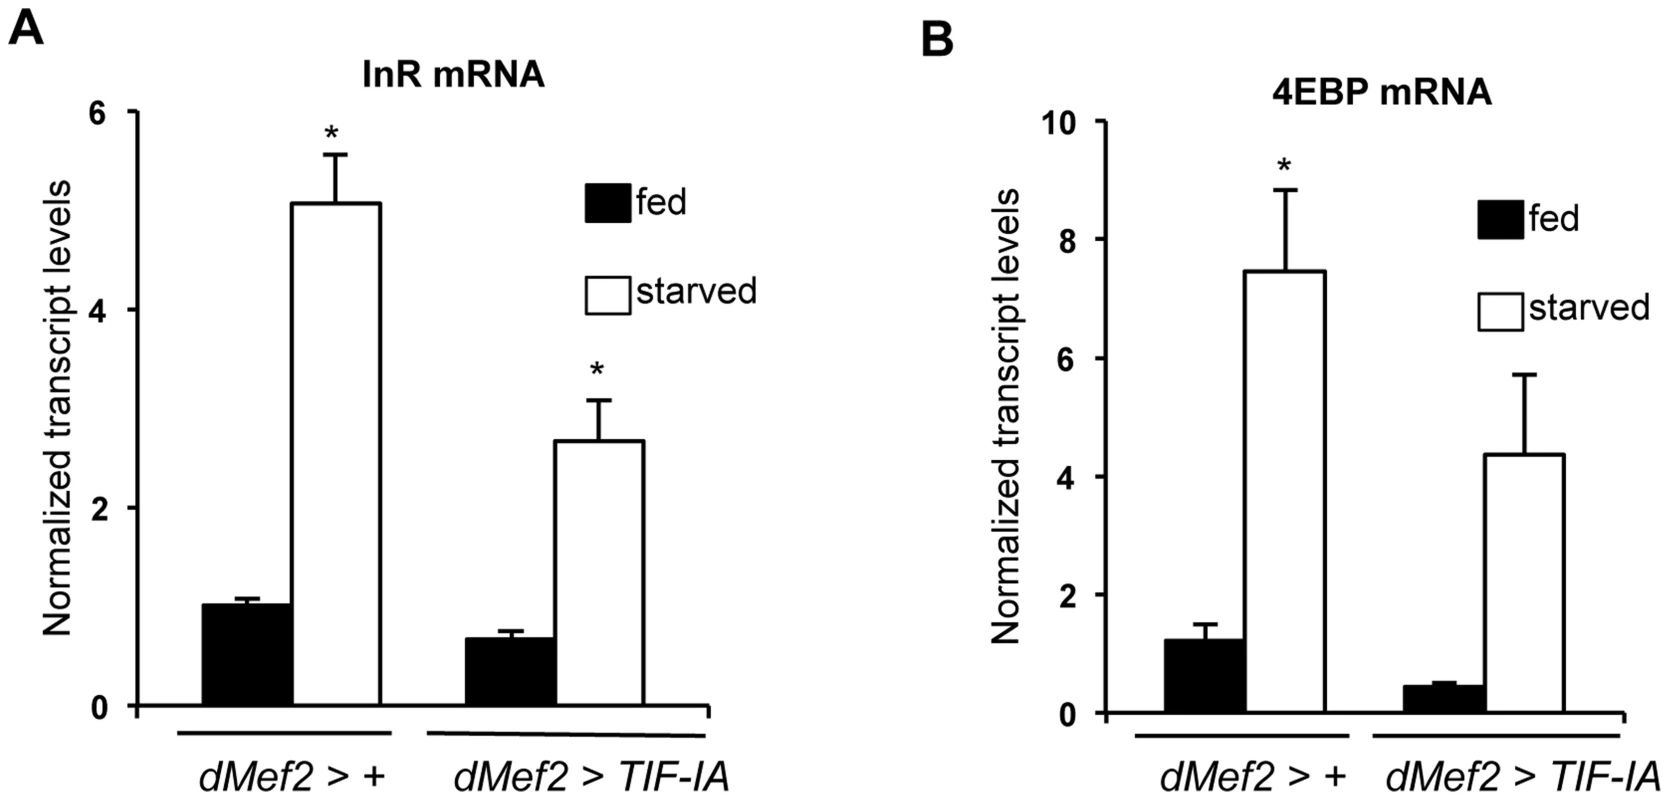 TIF-IA overexpression in muscle can partially reverse the effects of starvation on FOXO-dependent genes.